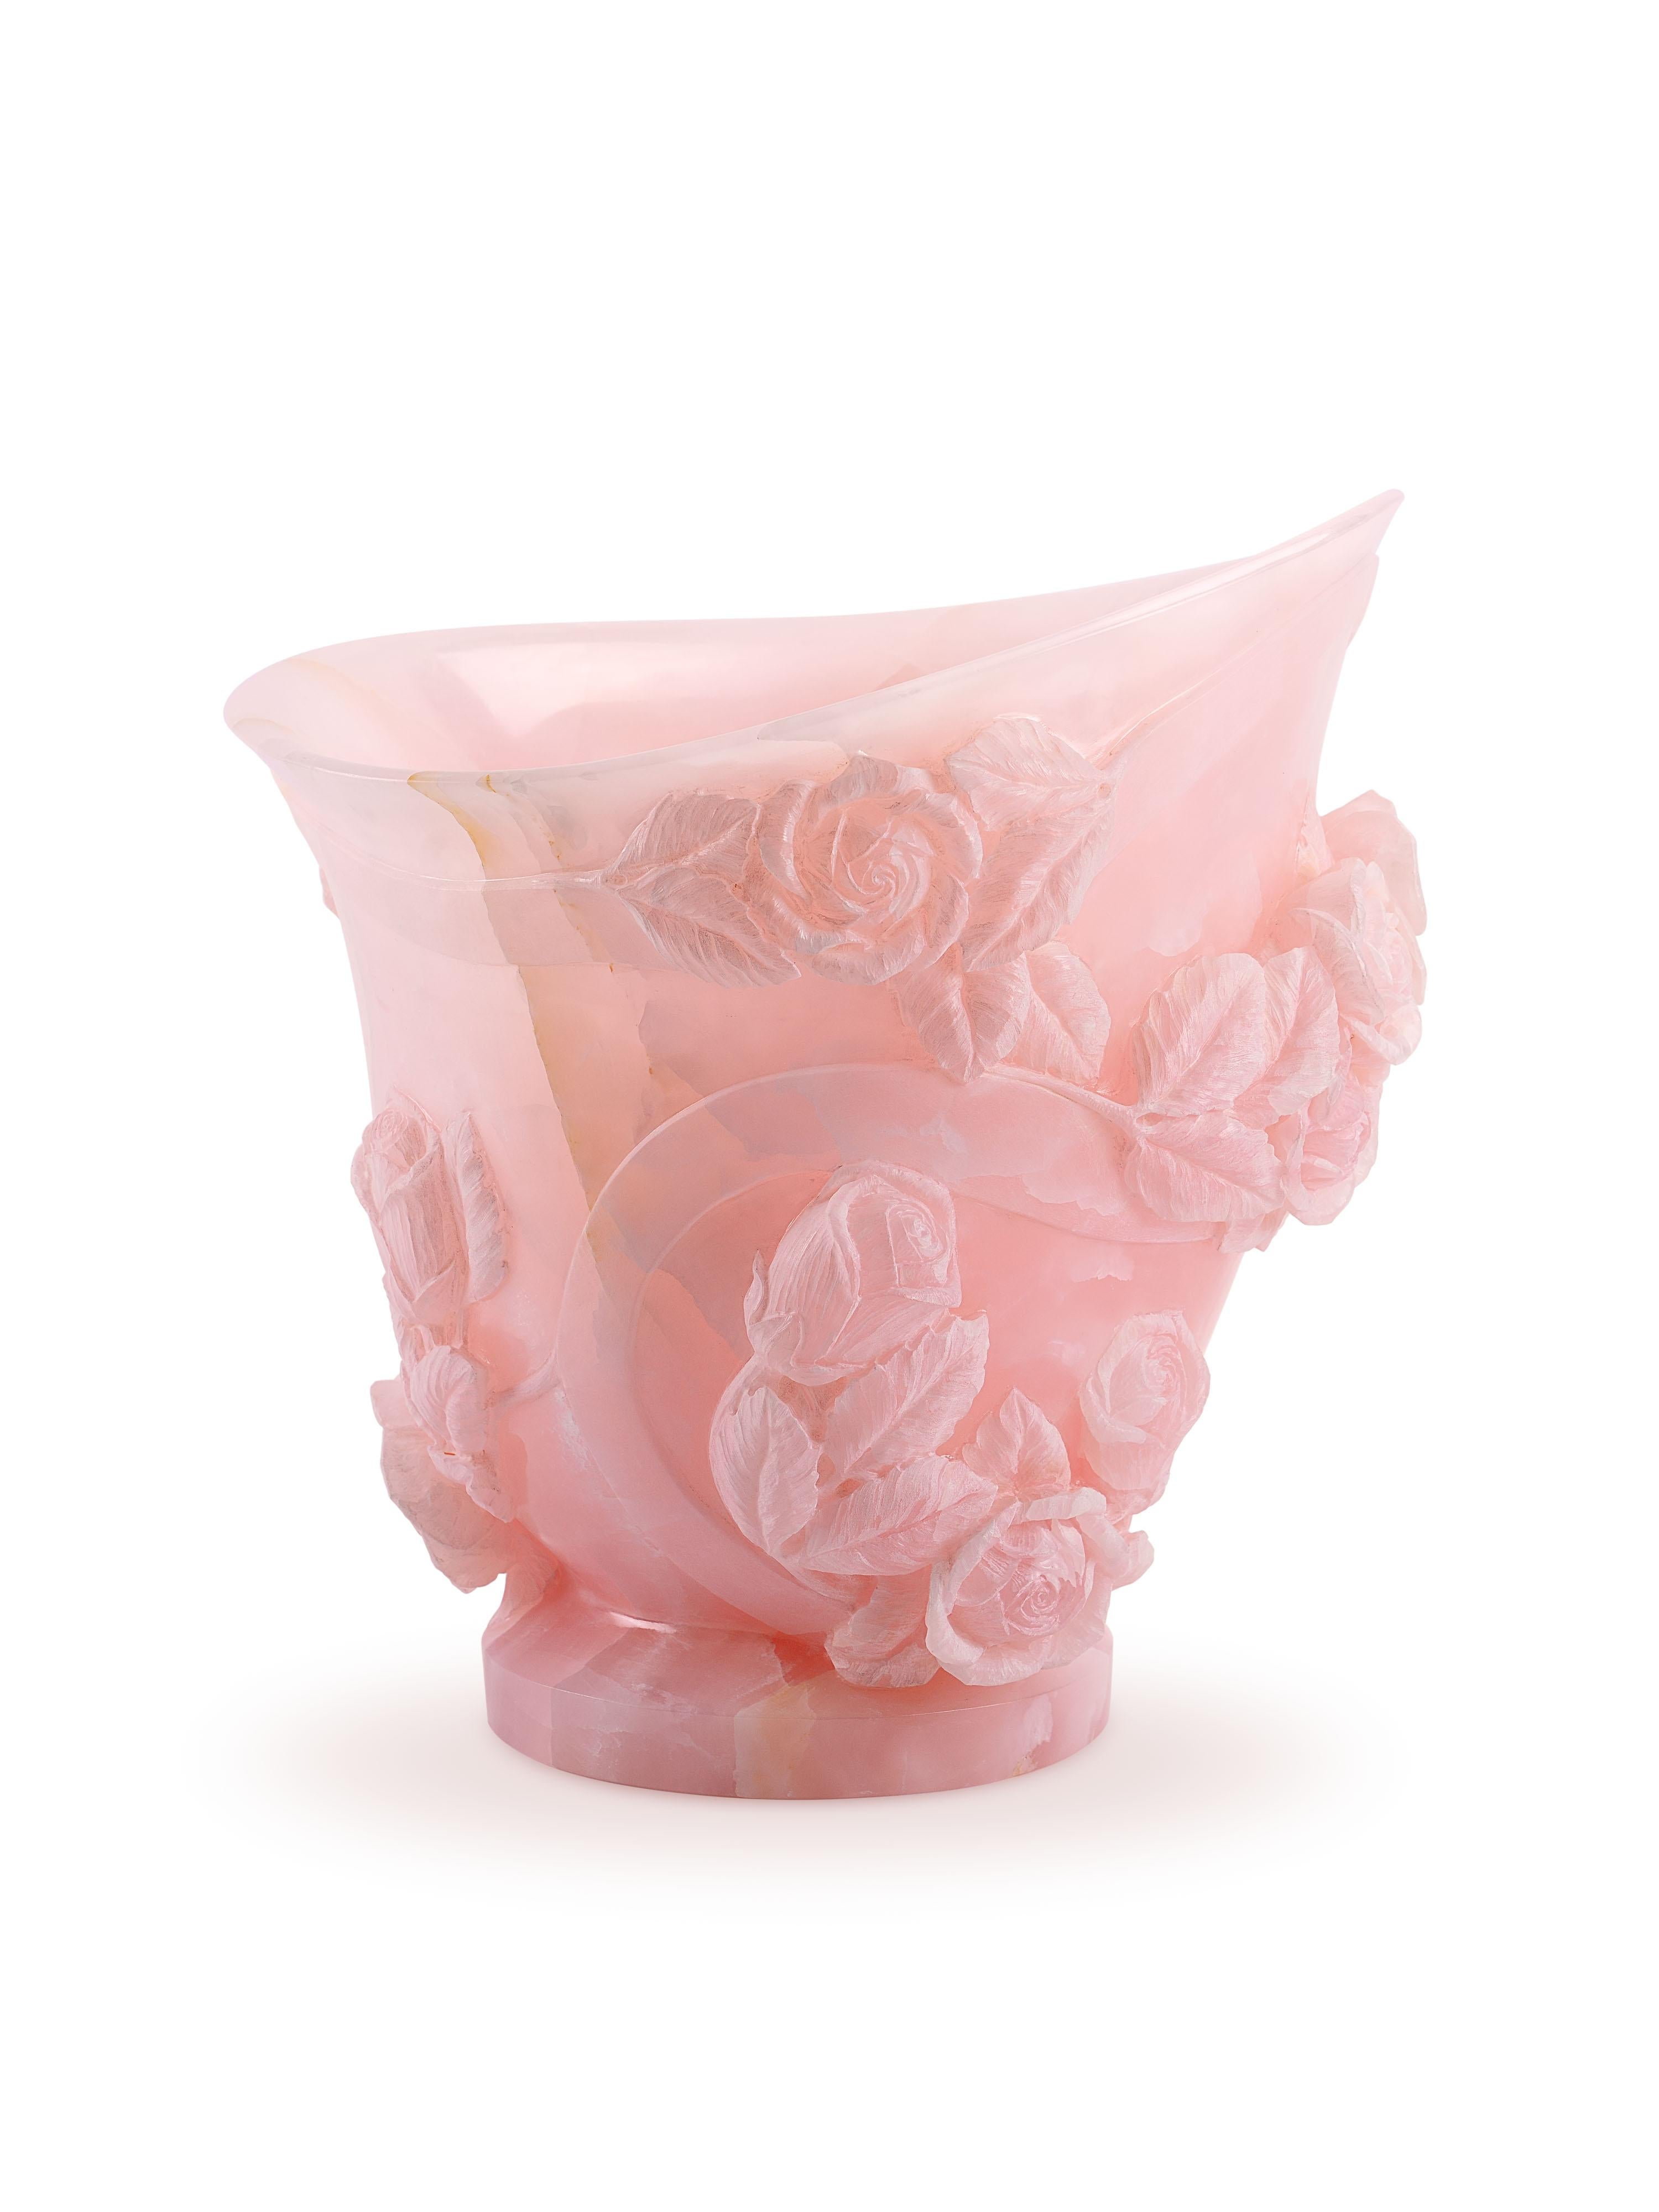 Italian Rose Sculpture Vase 13 Roses Hand Carved Italy Pink Onyx Block Limited Edition For Sale